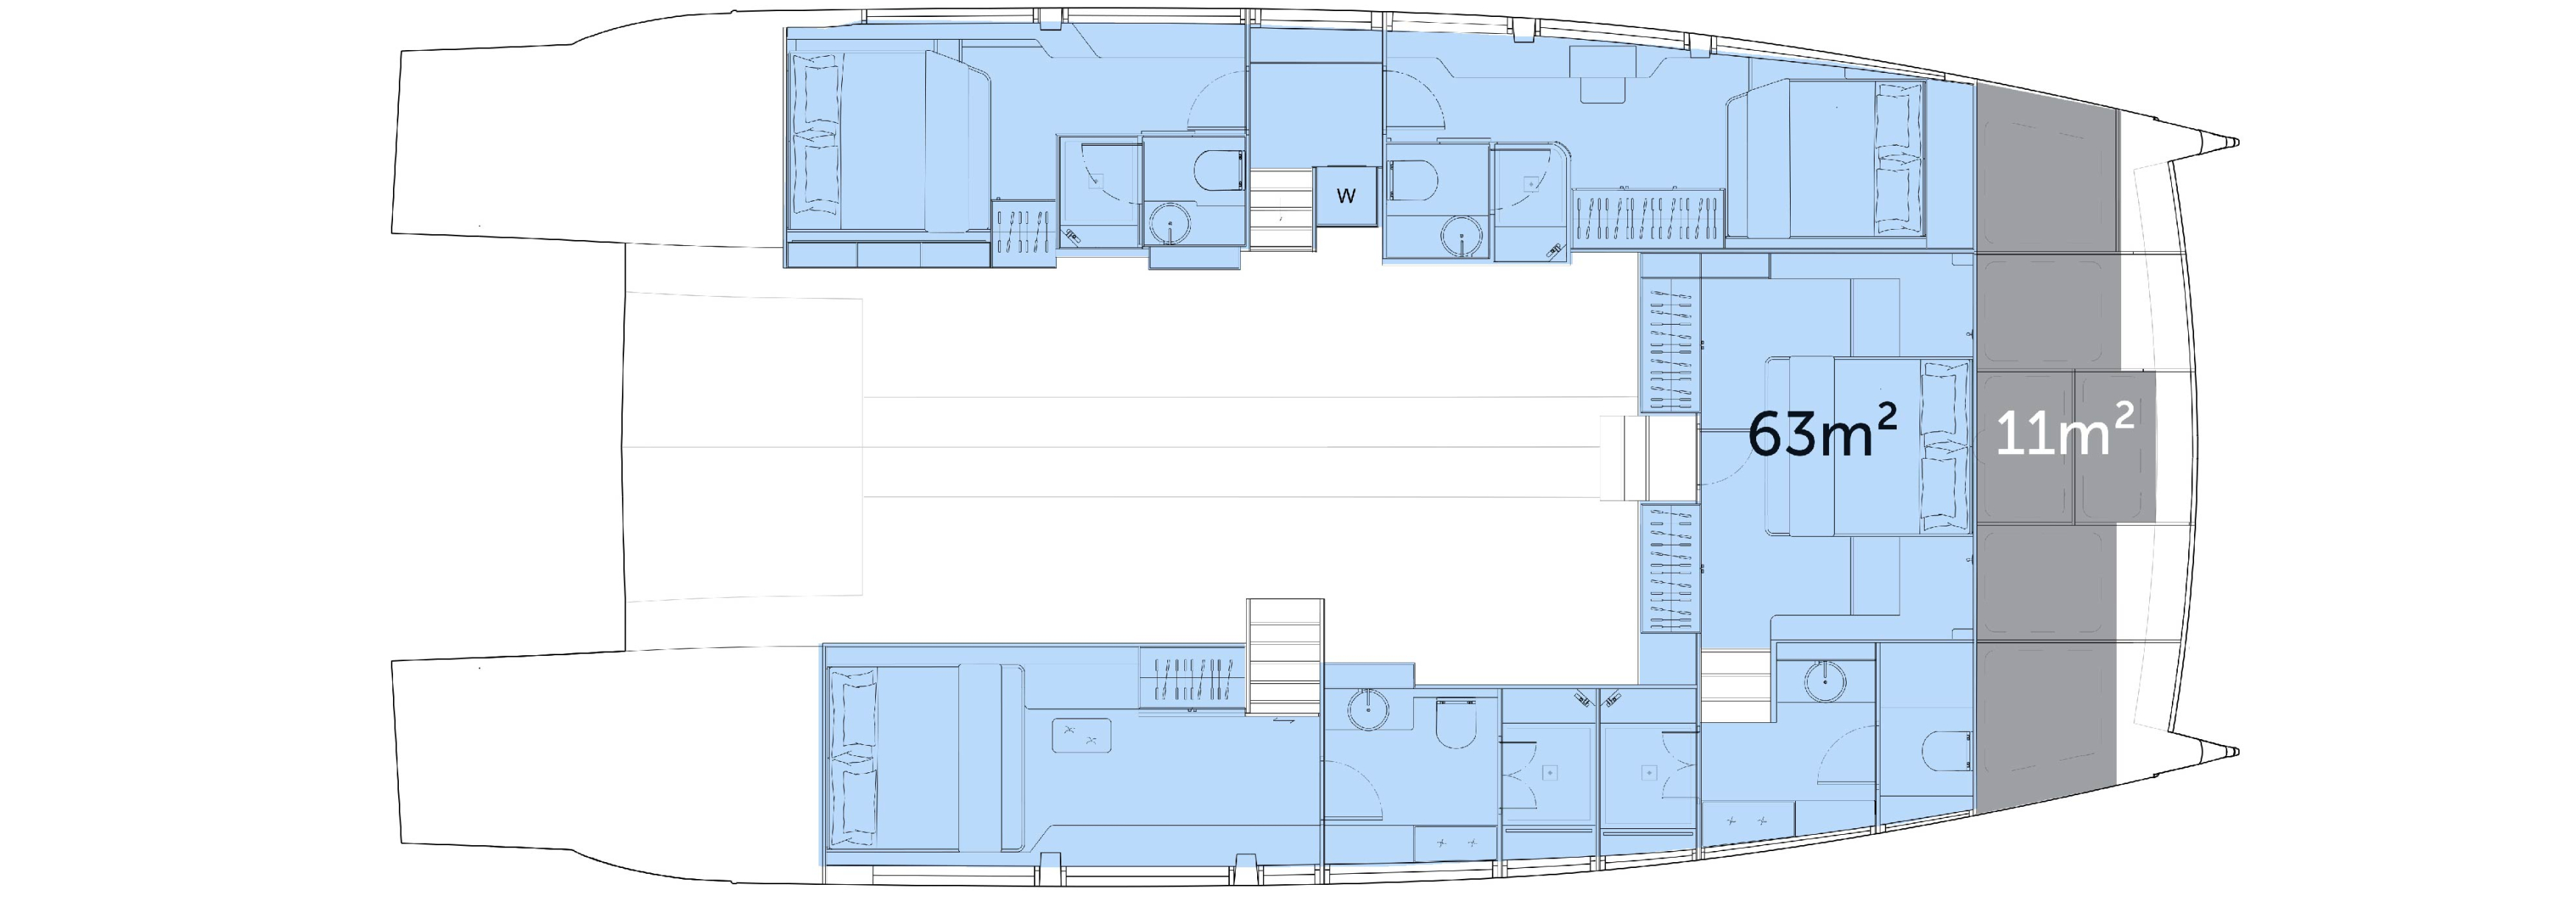 Yacht lower deck front master area plan